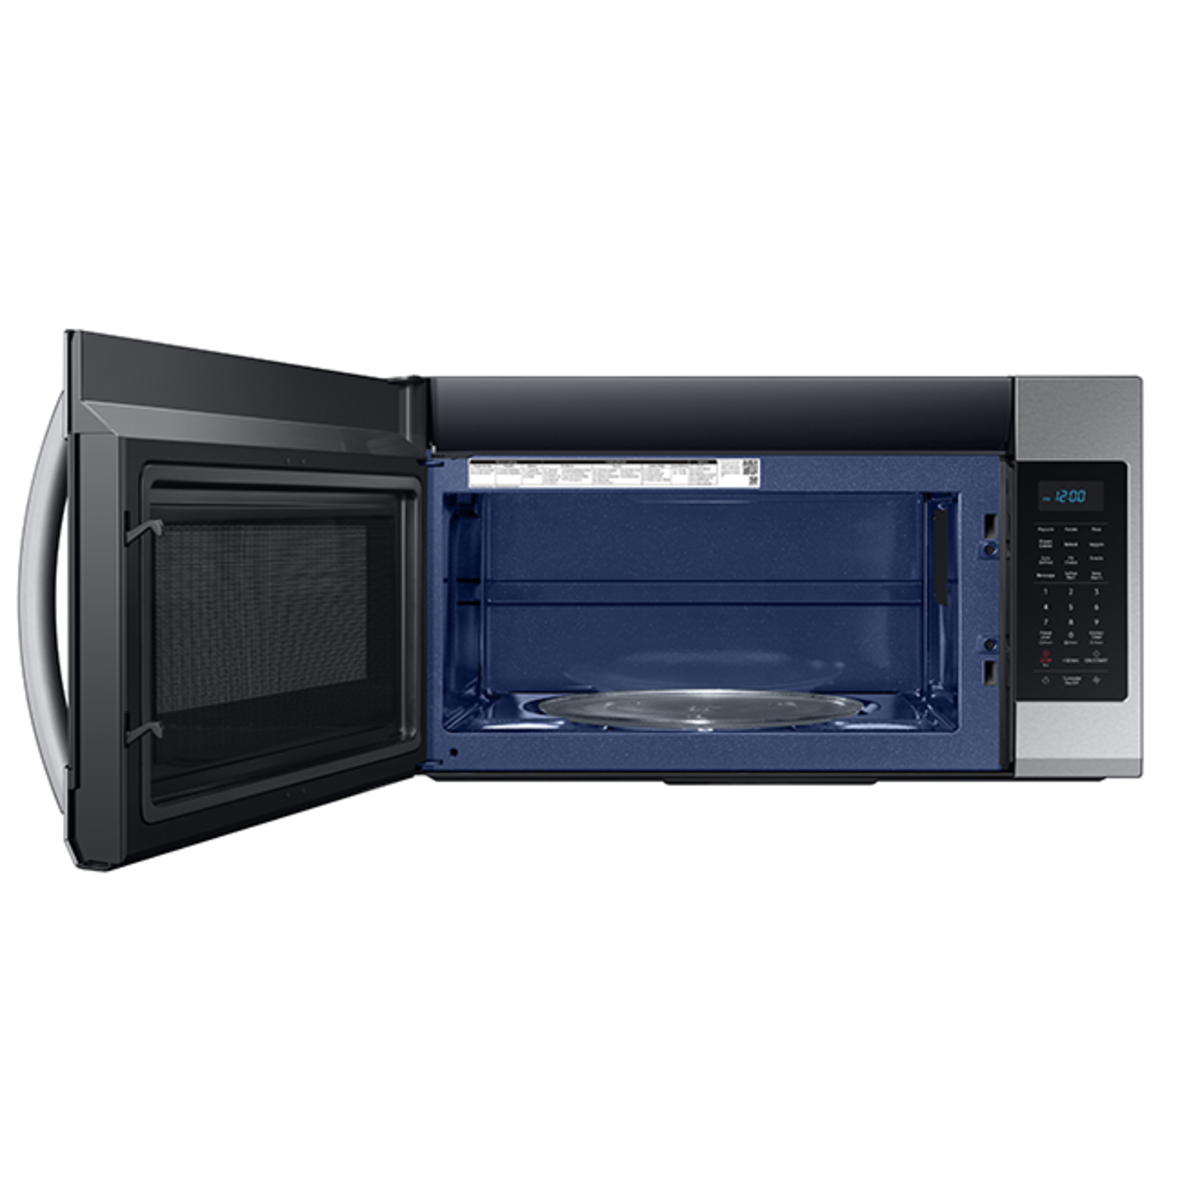 How To Fix The Error Code E-12 For Samsung Microwave